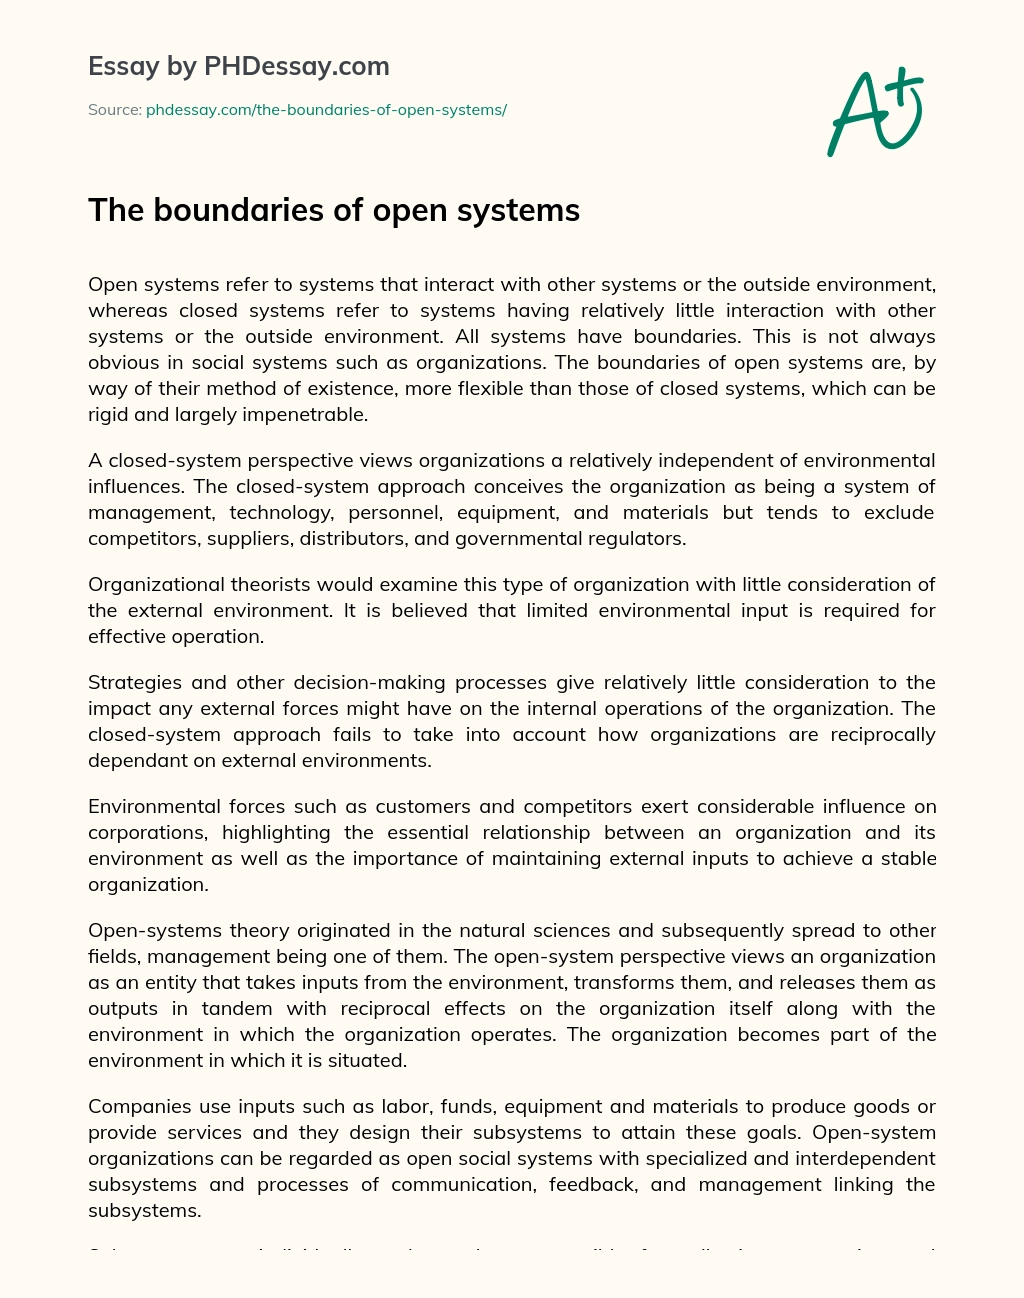 The Boundaries of Open Systems essay